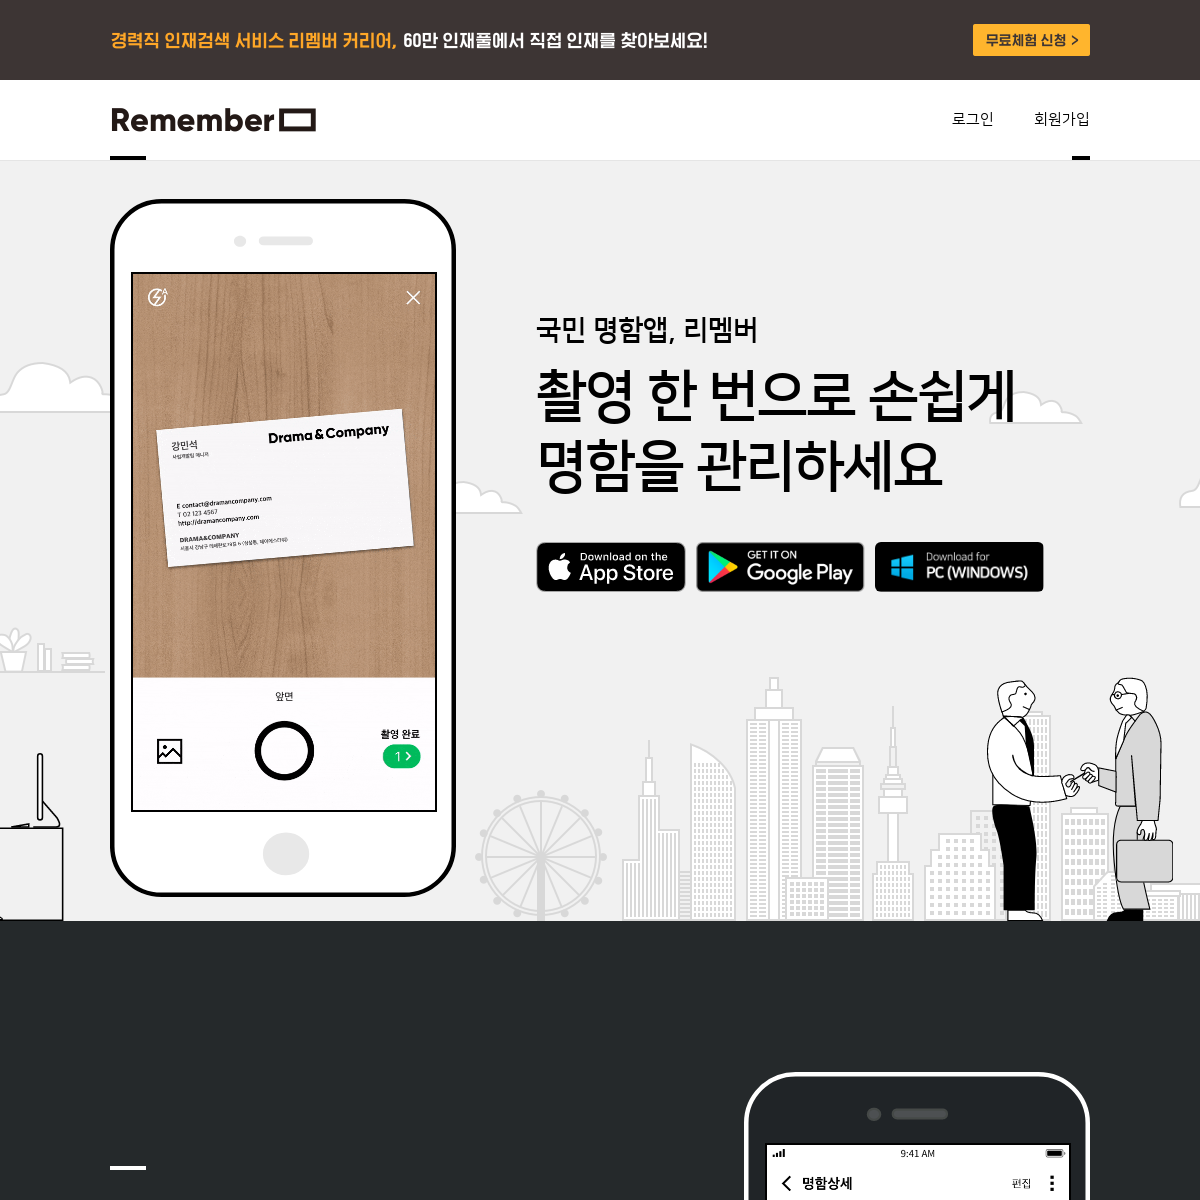 A complete backup of rememberapp.co.kr